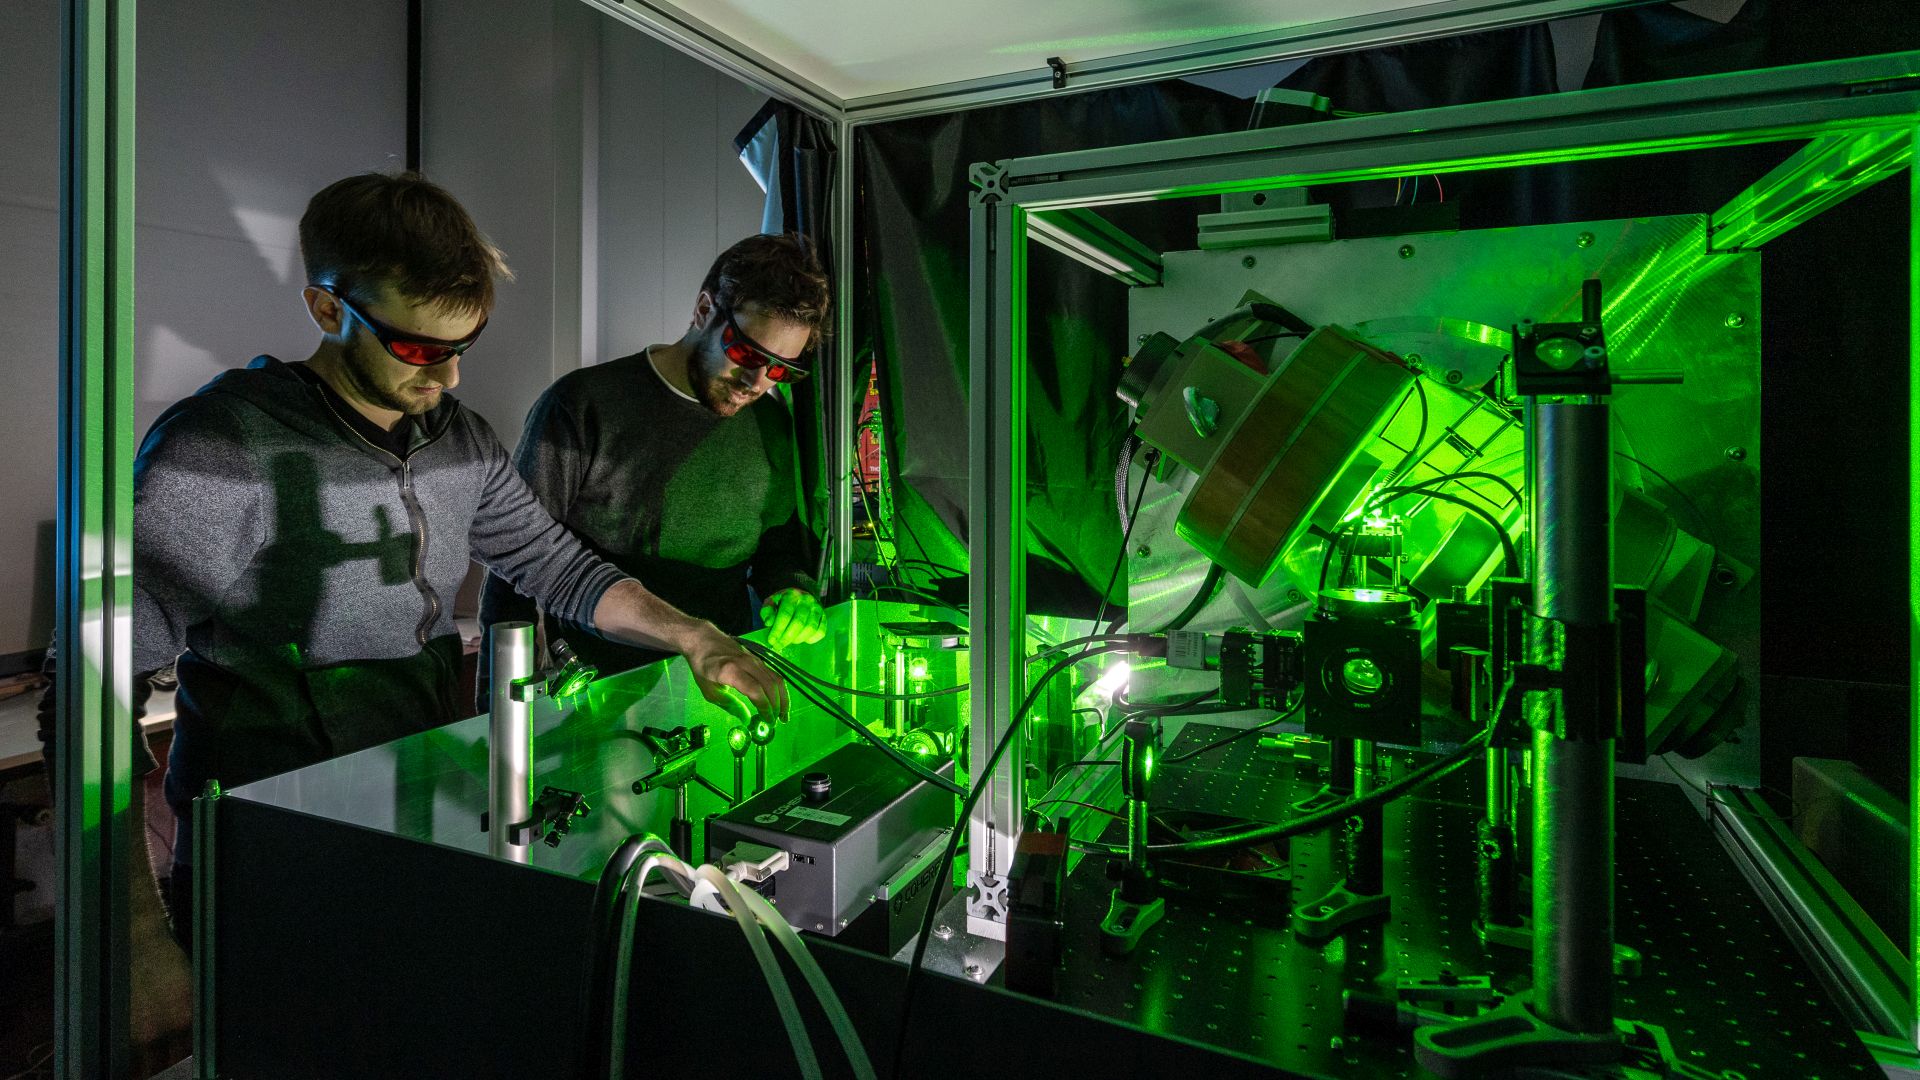 Researchers work on an optical setup for microscopic NMR spectroscopy